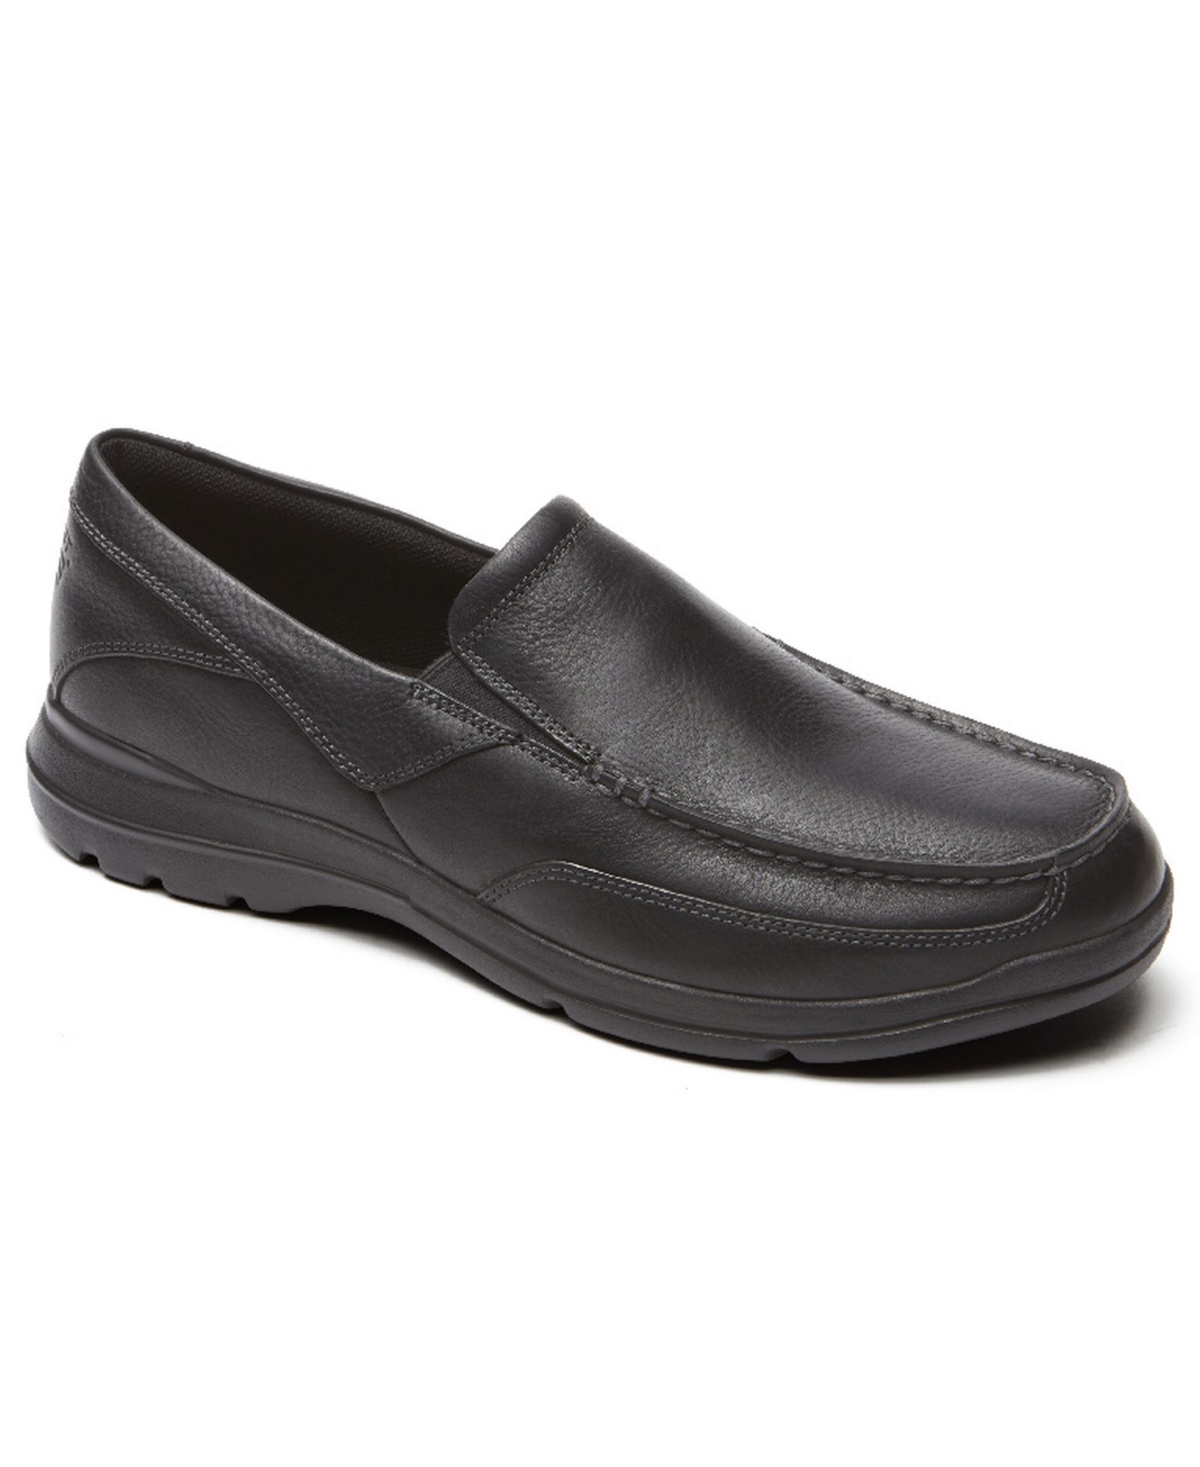 Men's Junction Point Slip On Shoes - Chocolate